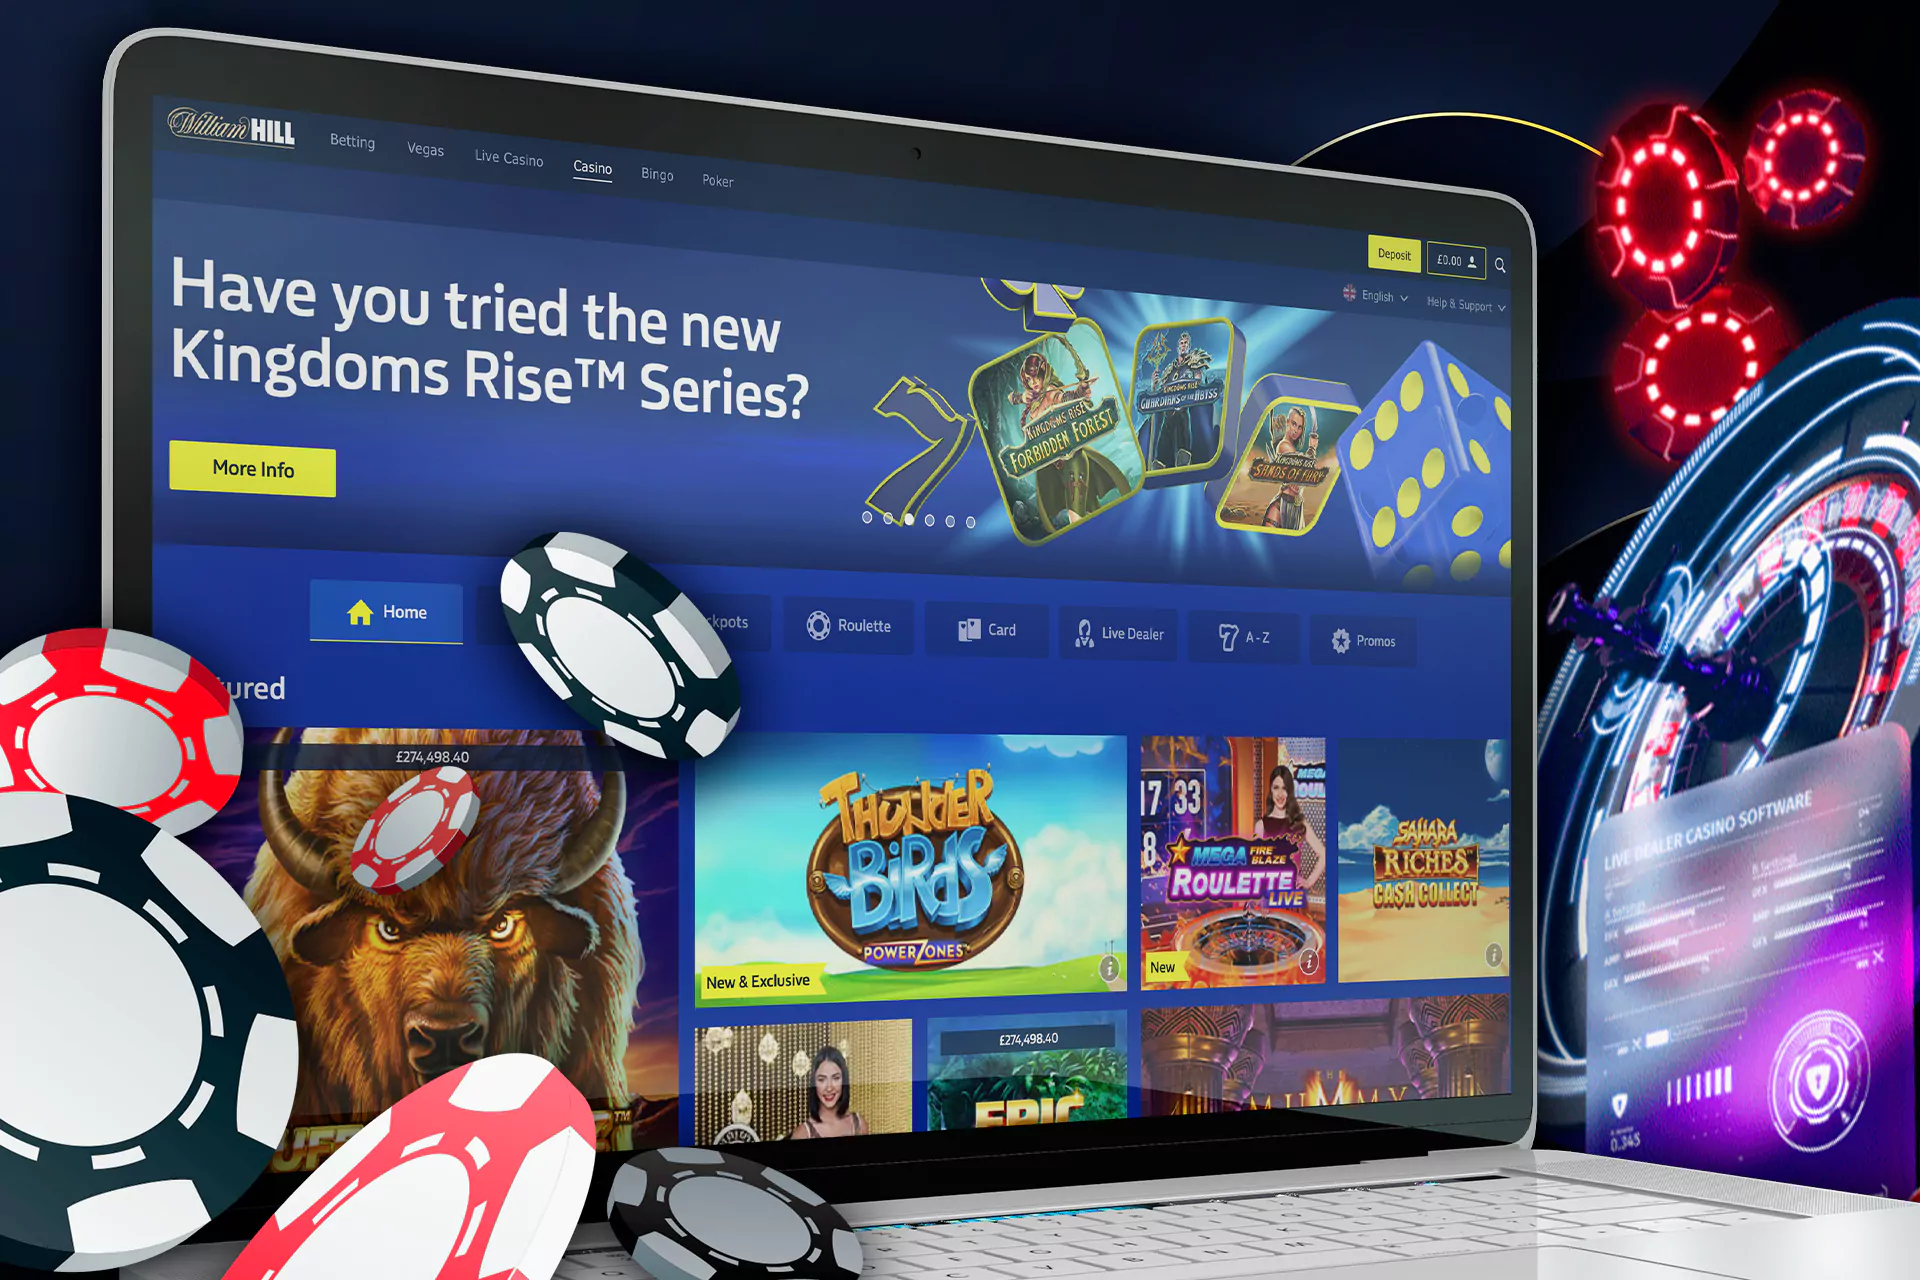 Play your favorite caisno games at William Hill.